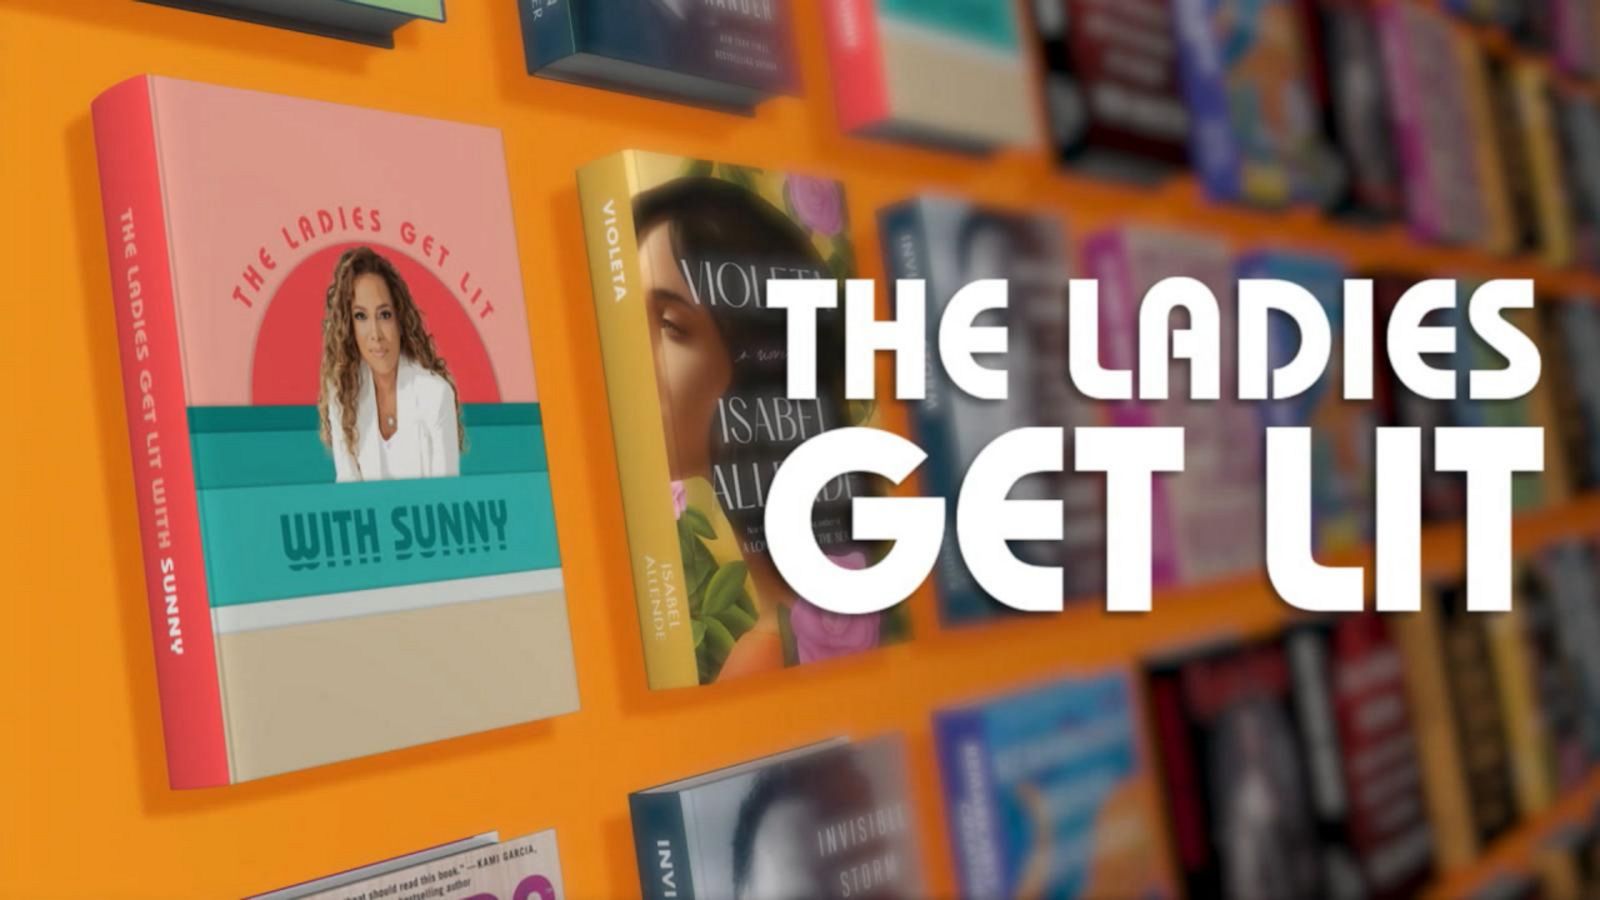 Sunny Hostin shares her favorite books in ‘The Ladies Get Lit’ Series